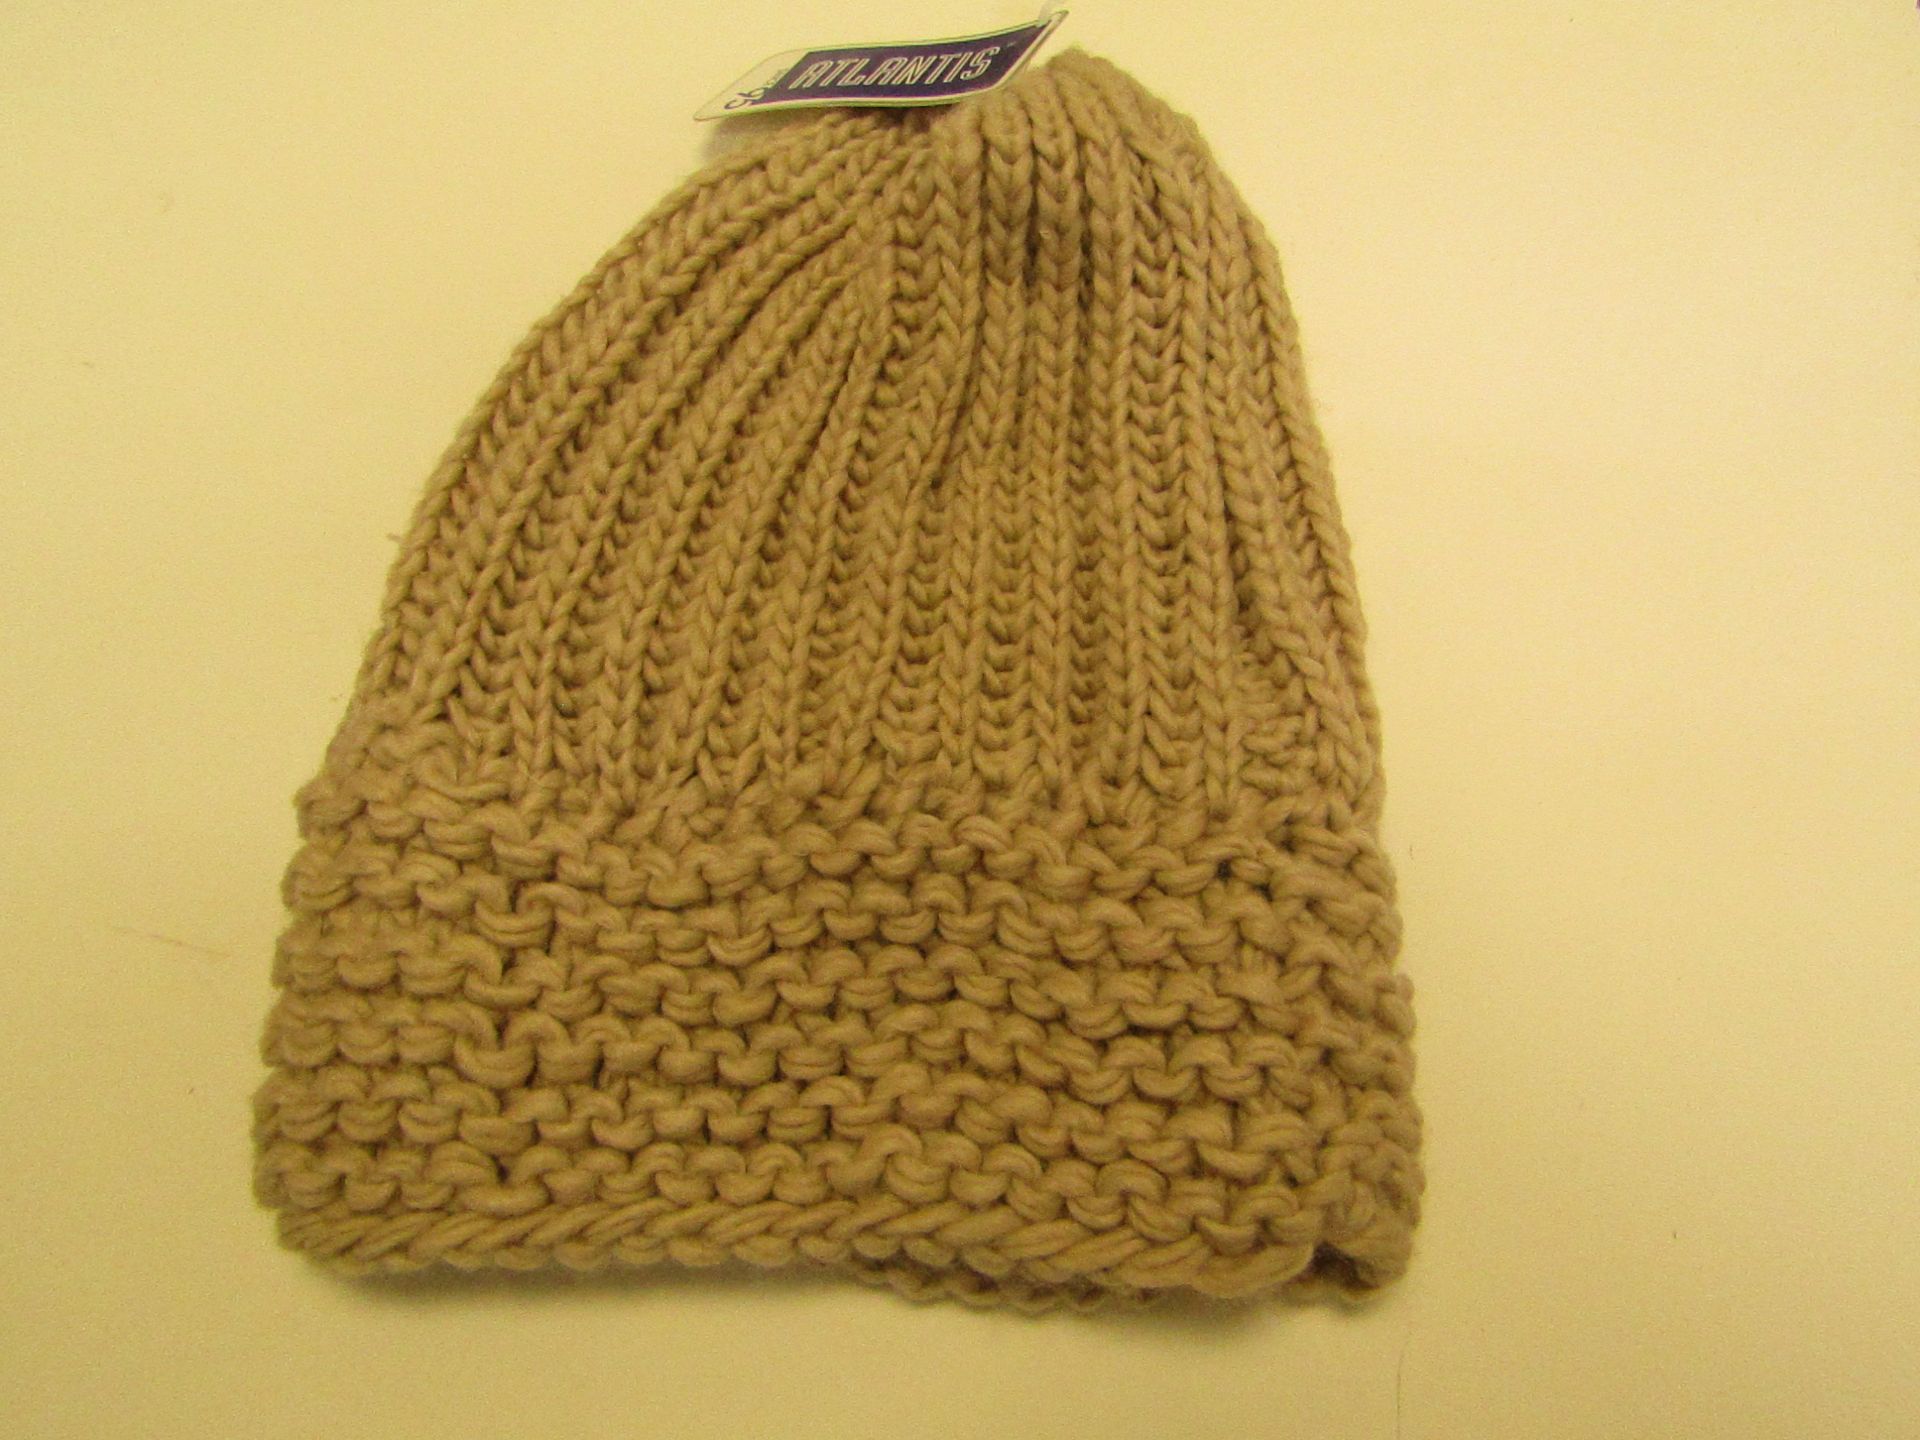 10 X Atlantis Beige Knitted Winter Hats All New With Tags